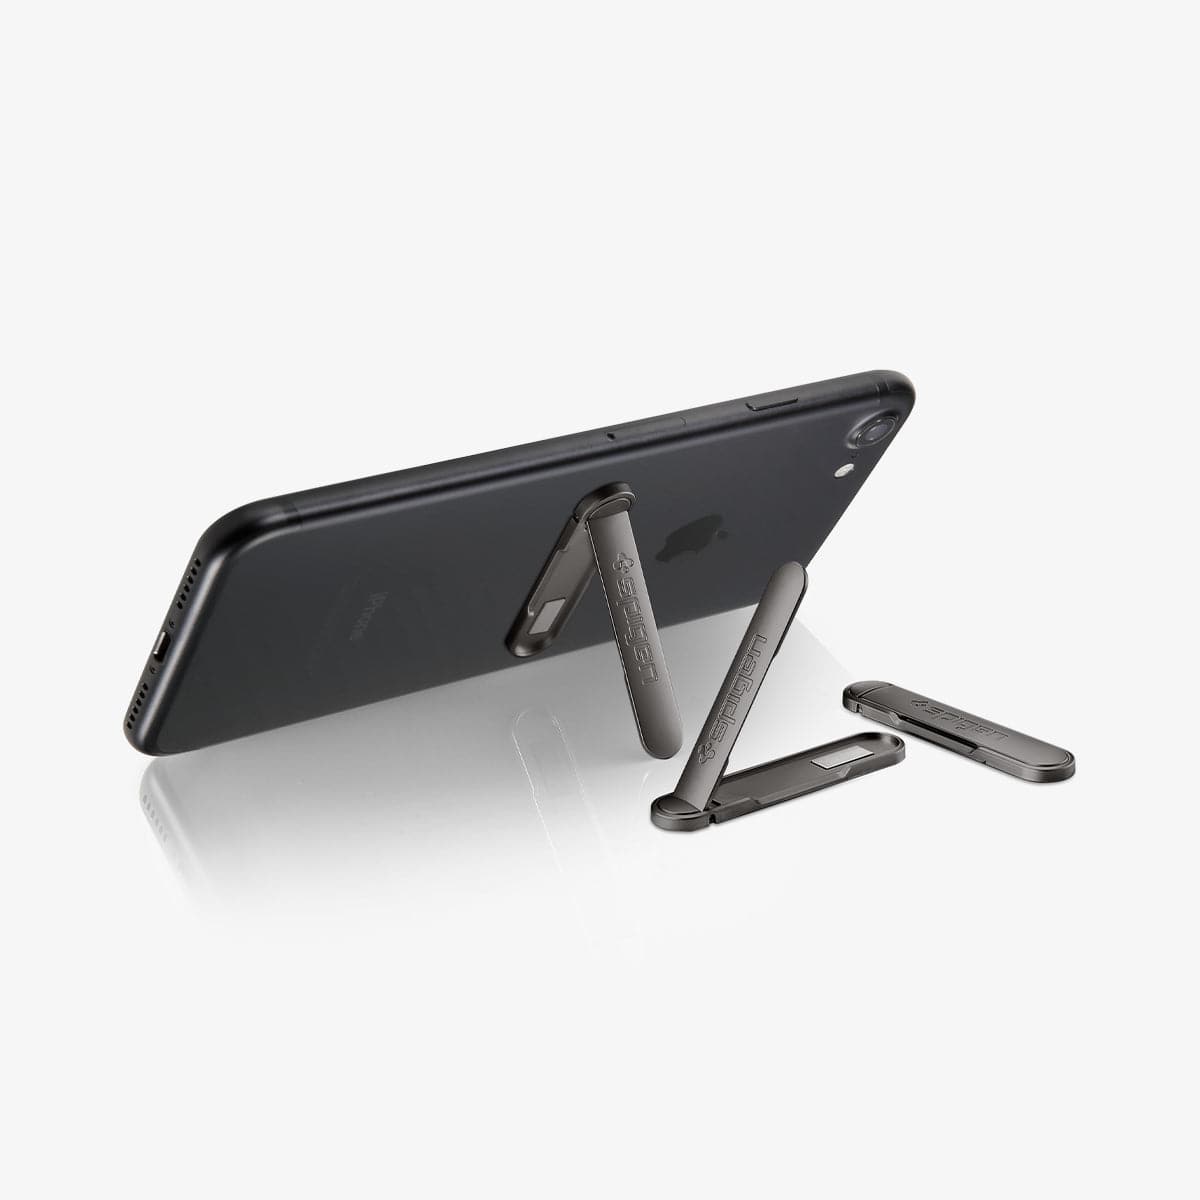 000EM20860 - U100 Universal Kickstand (Metal) in gunmetal showing the phone propped up by kickstand attached